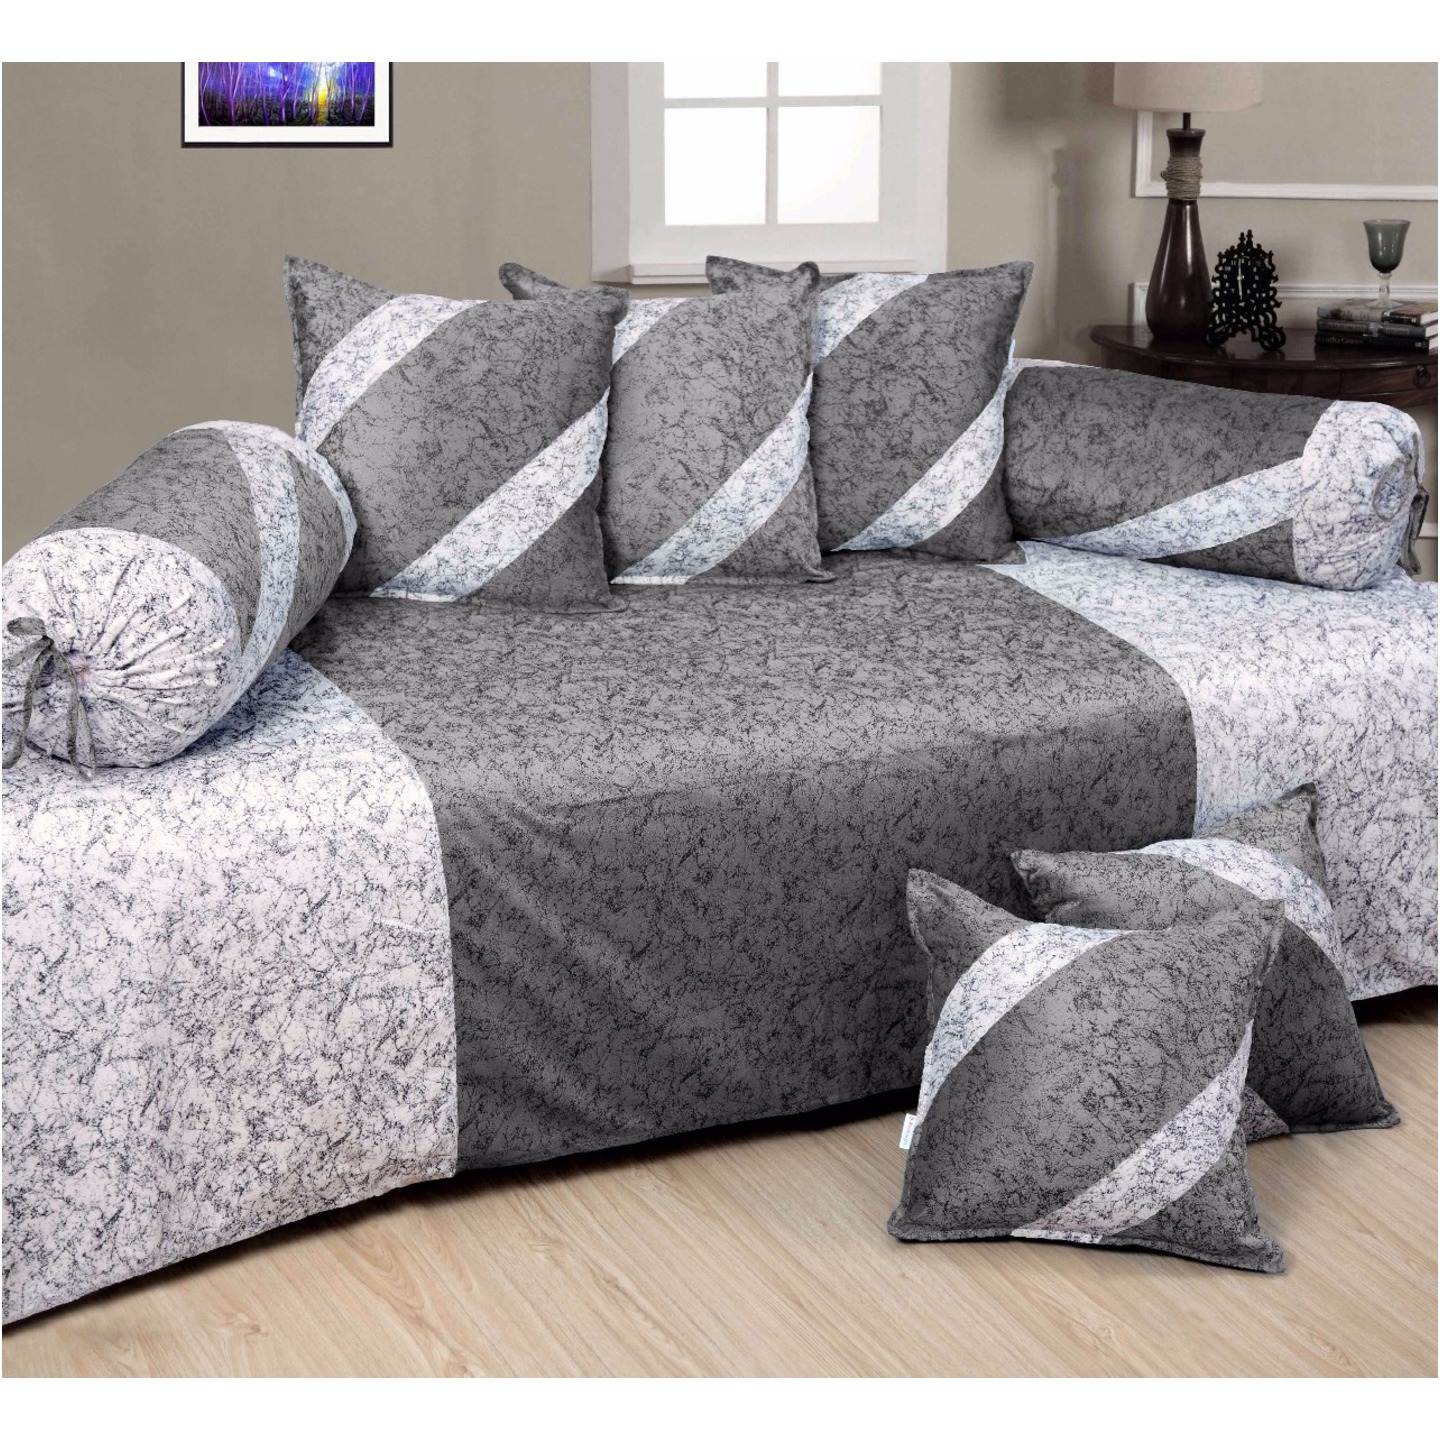 HandTex Home Presents Velvet Grey & White Color Diwan Set with 1 Single Bedsheet with 5 Cushion Covers & 2 Blosters Set of 8 pcs